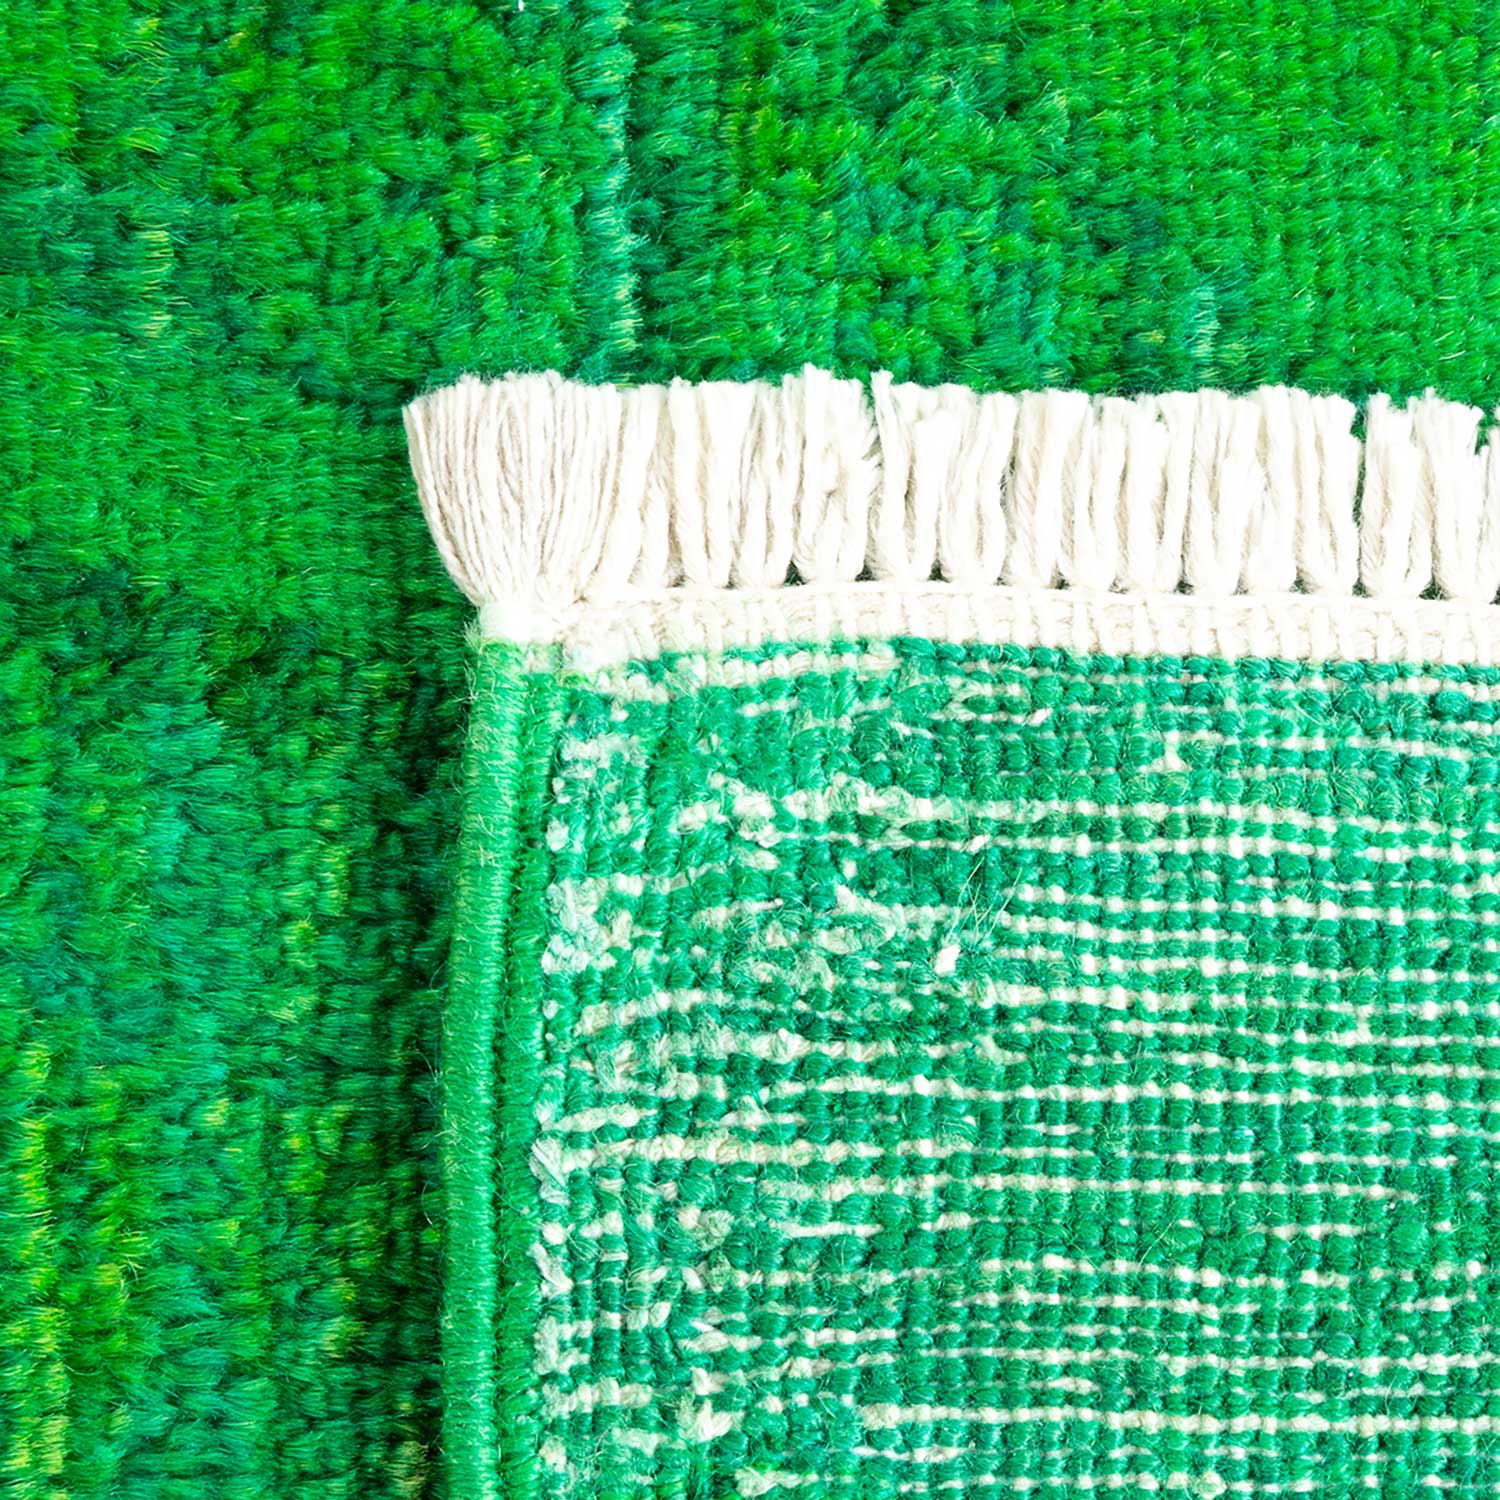 Close-up view of a green textile with plush and woven textures.